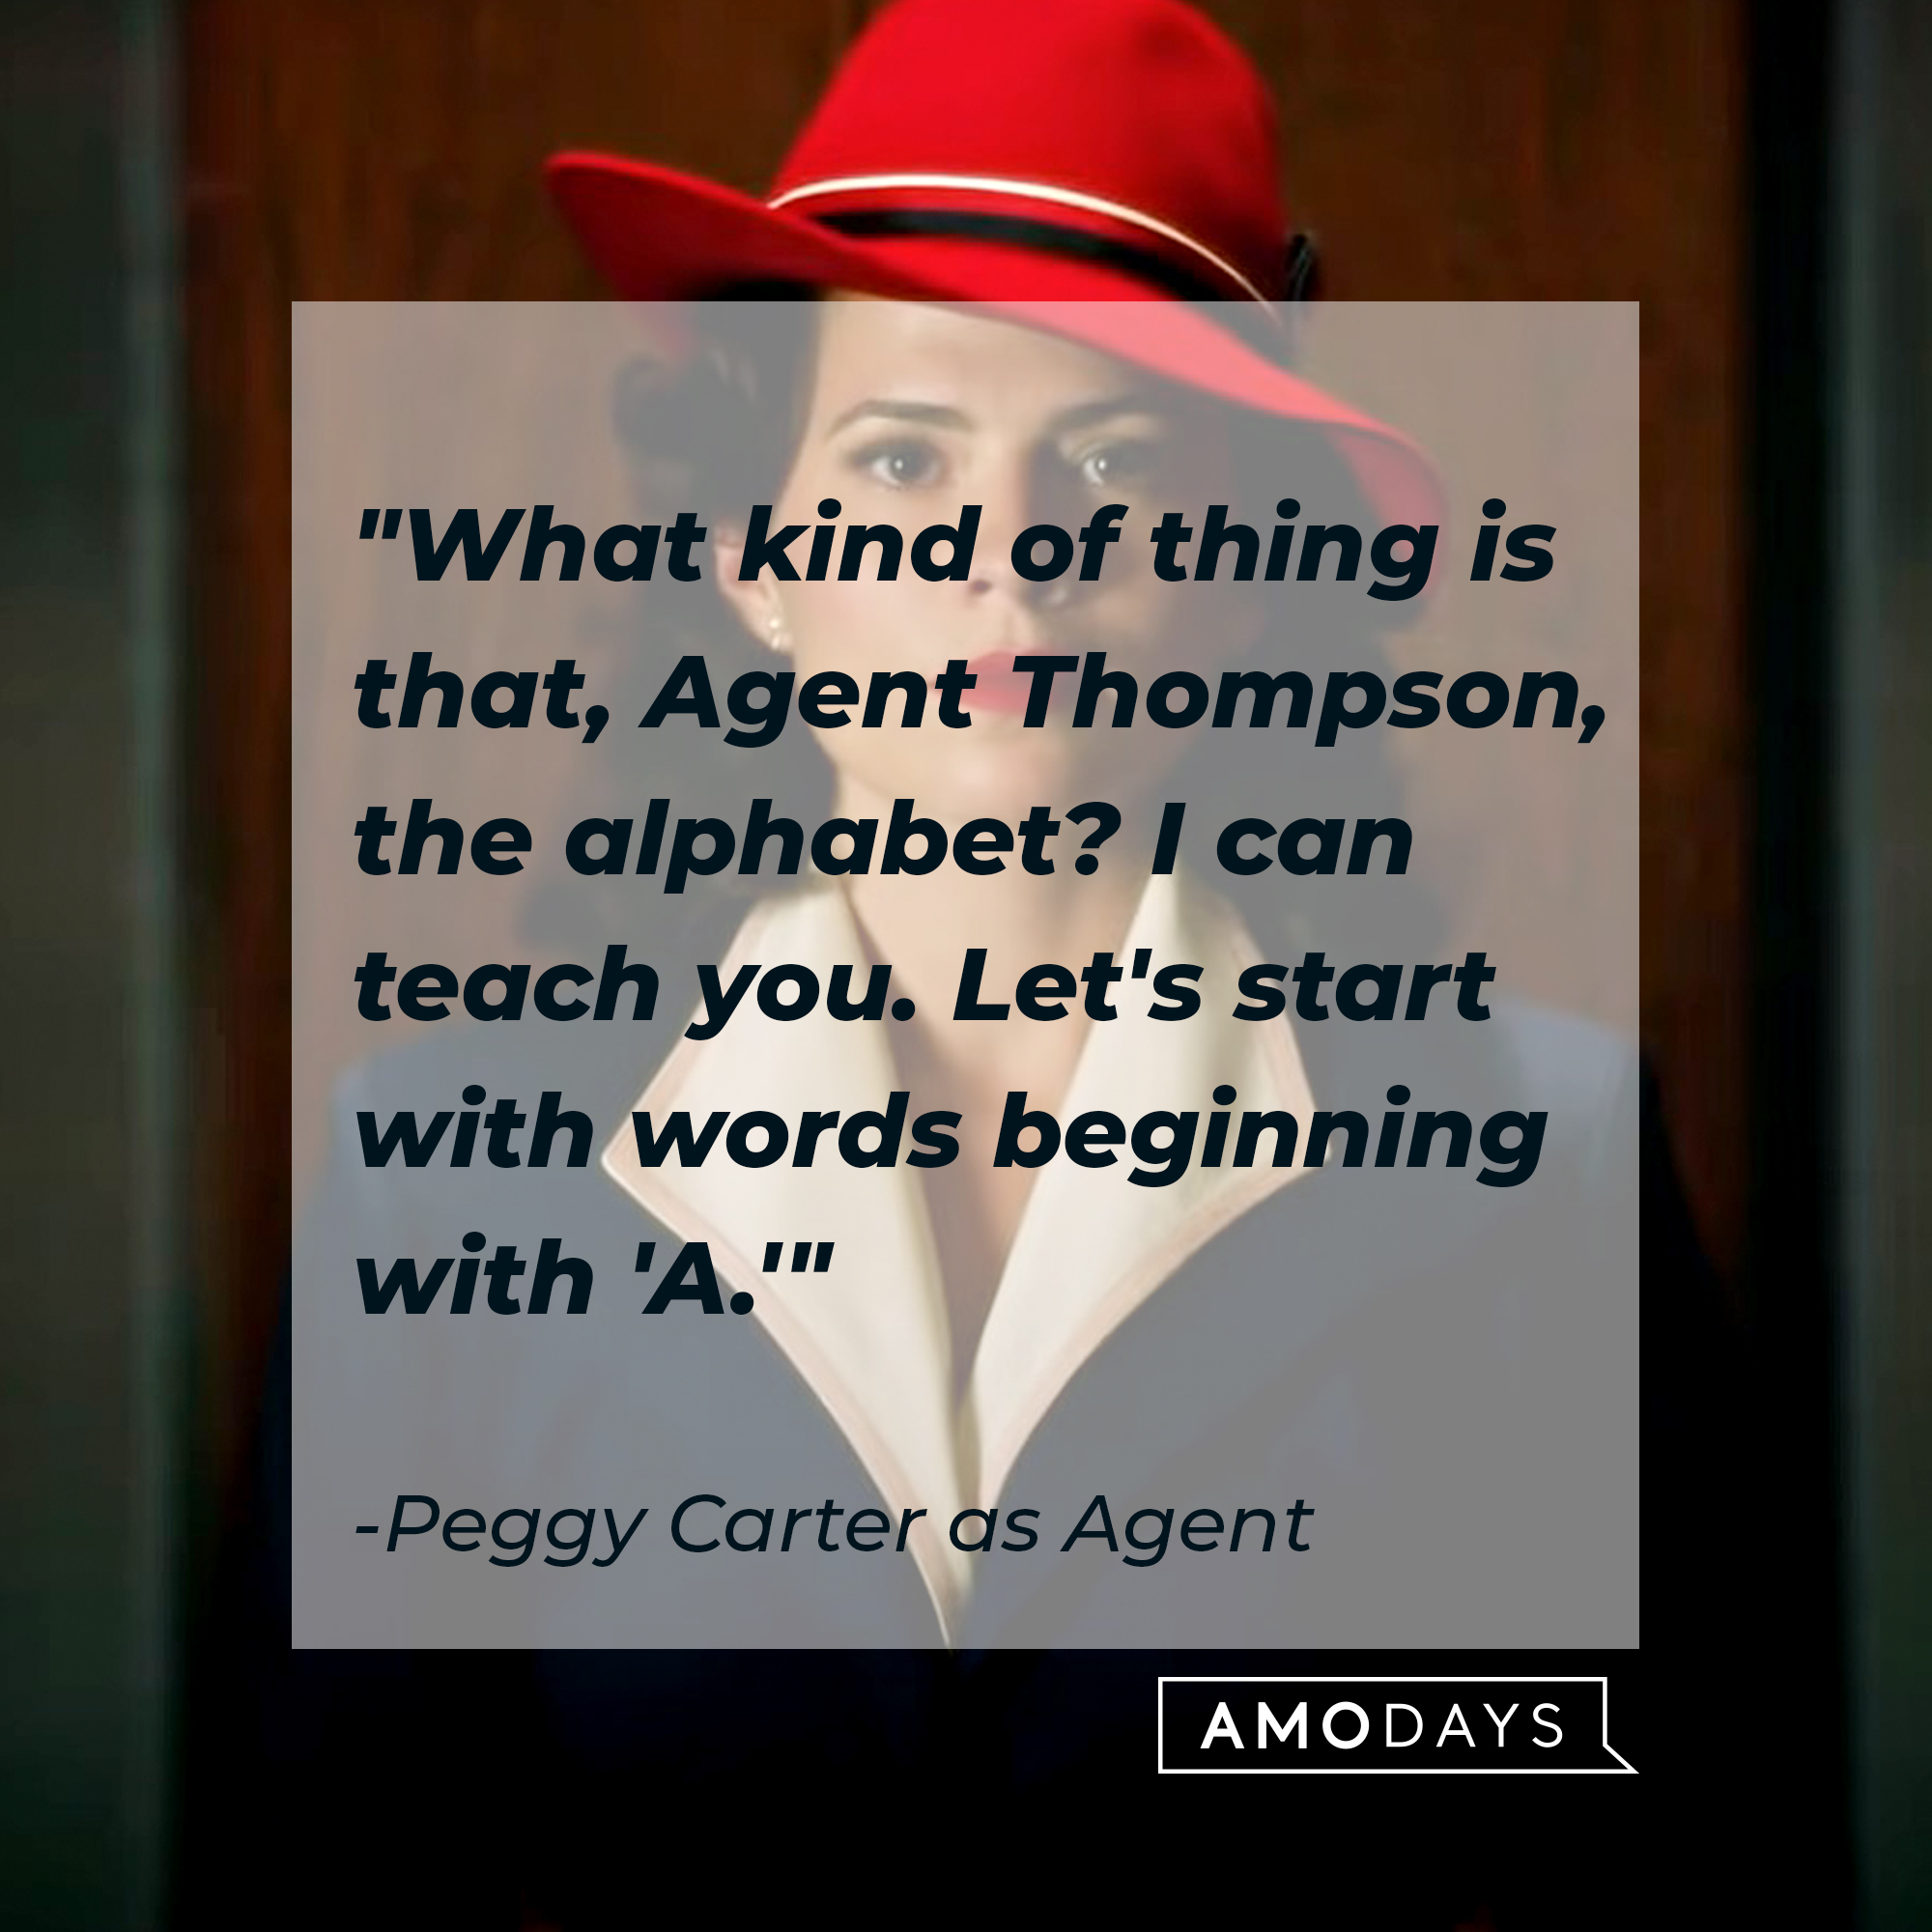 Peggy Carter as Agent's quote: "What kind of thing is that, Agent Thompson, the alphabet? I can teach you. Let's start with words beginning with 'A.'" | Source: Facebook.com/marvelstudios